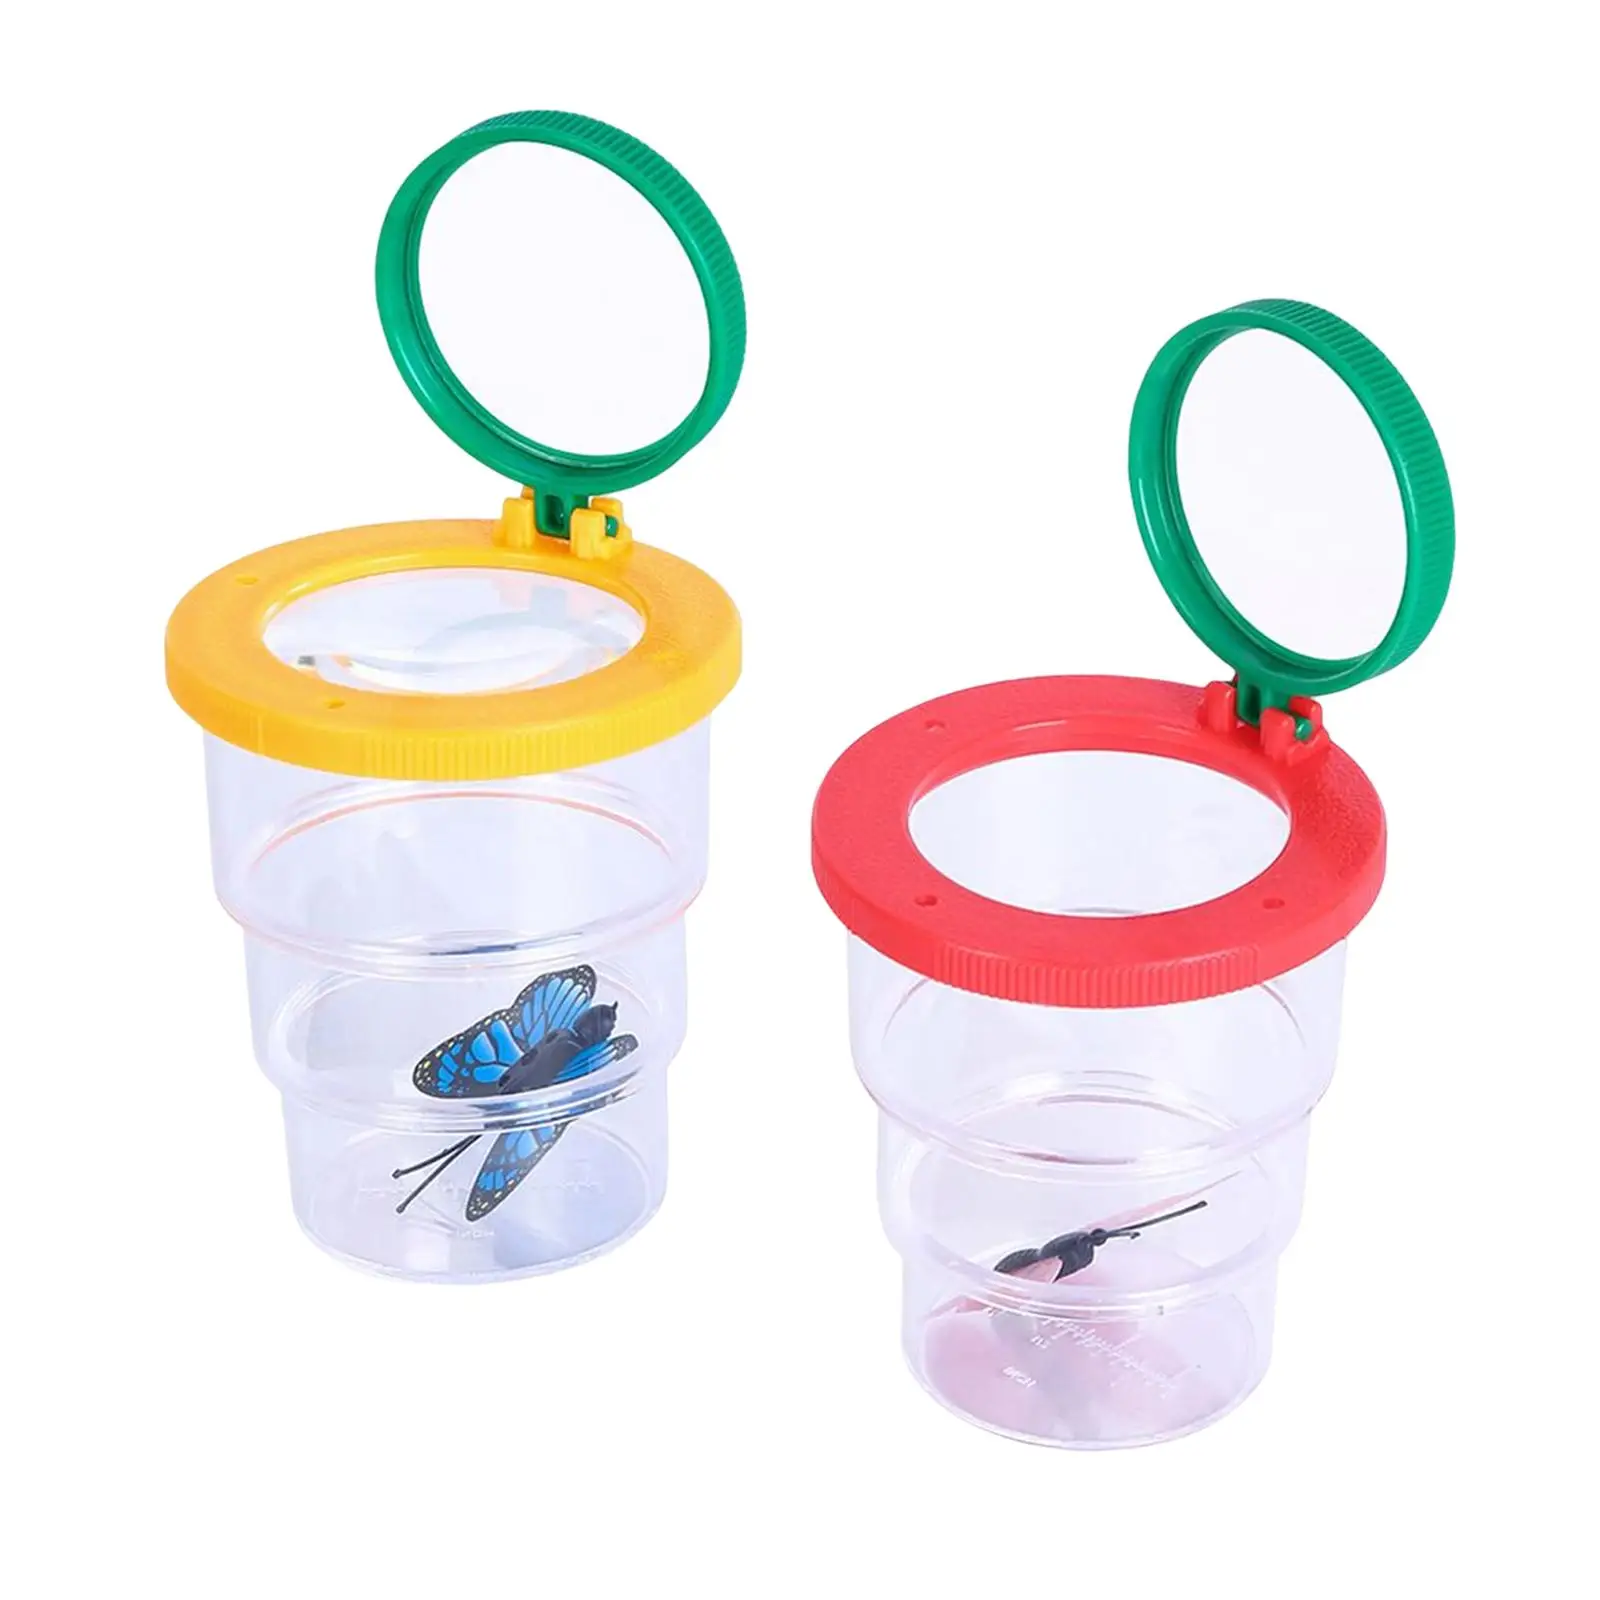 Insect Magnifier Viewing Observation Toy Observer Case for Children Holiday Gifts